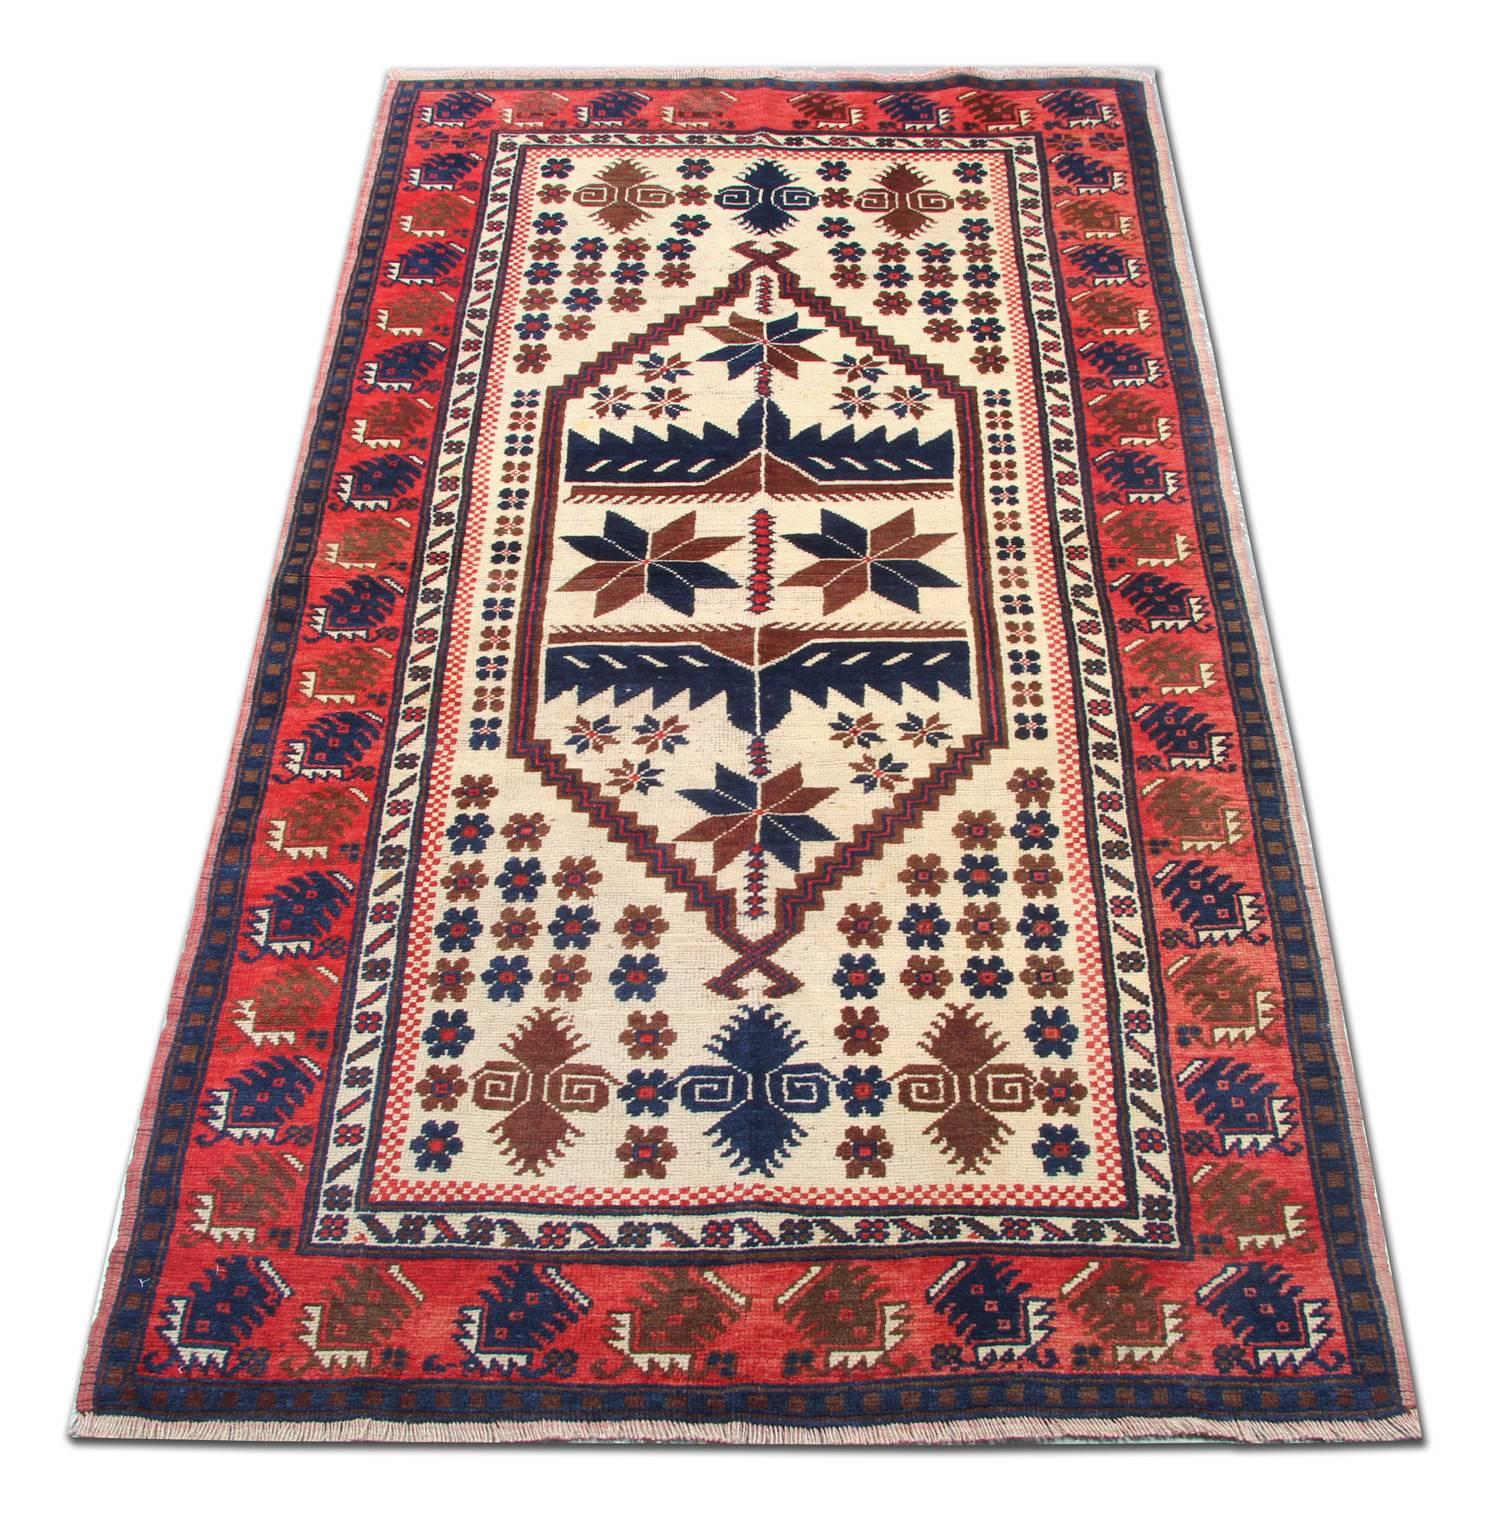 This geometric wool area rug was woven by hand with a fantastic tribal village design. The central pattern features a cream background with medallions that have been incorporated in accents of beige and deep blue. This is then enclosed with a